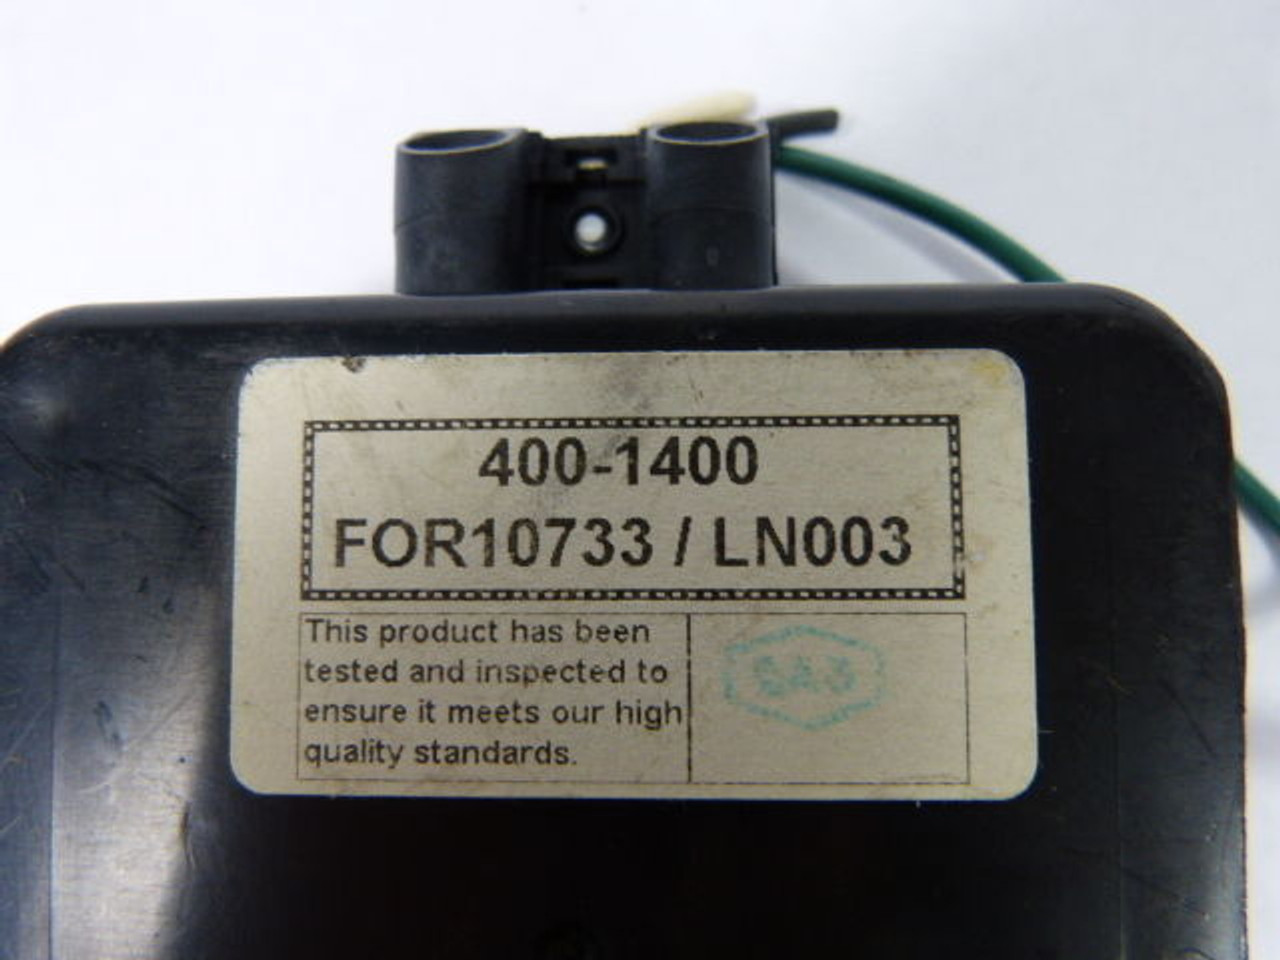 The IT Protector HS Model 400-1400 Surge Protector USED